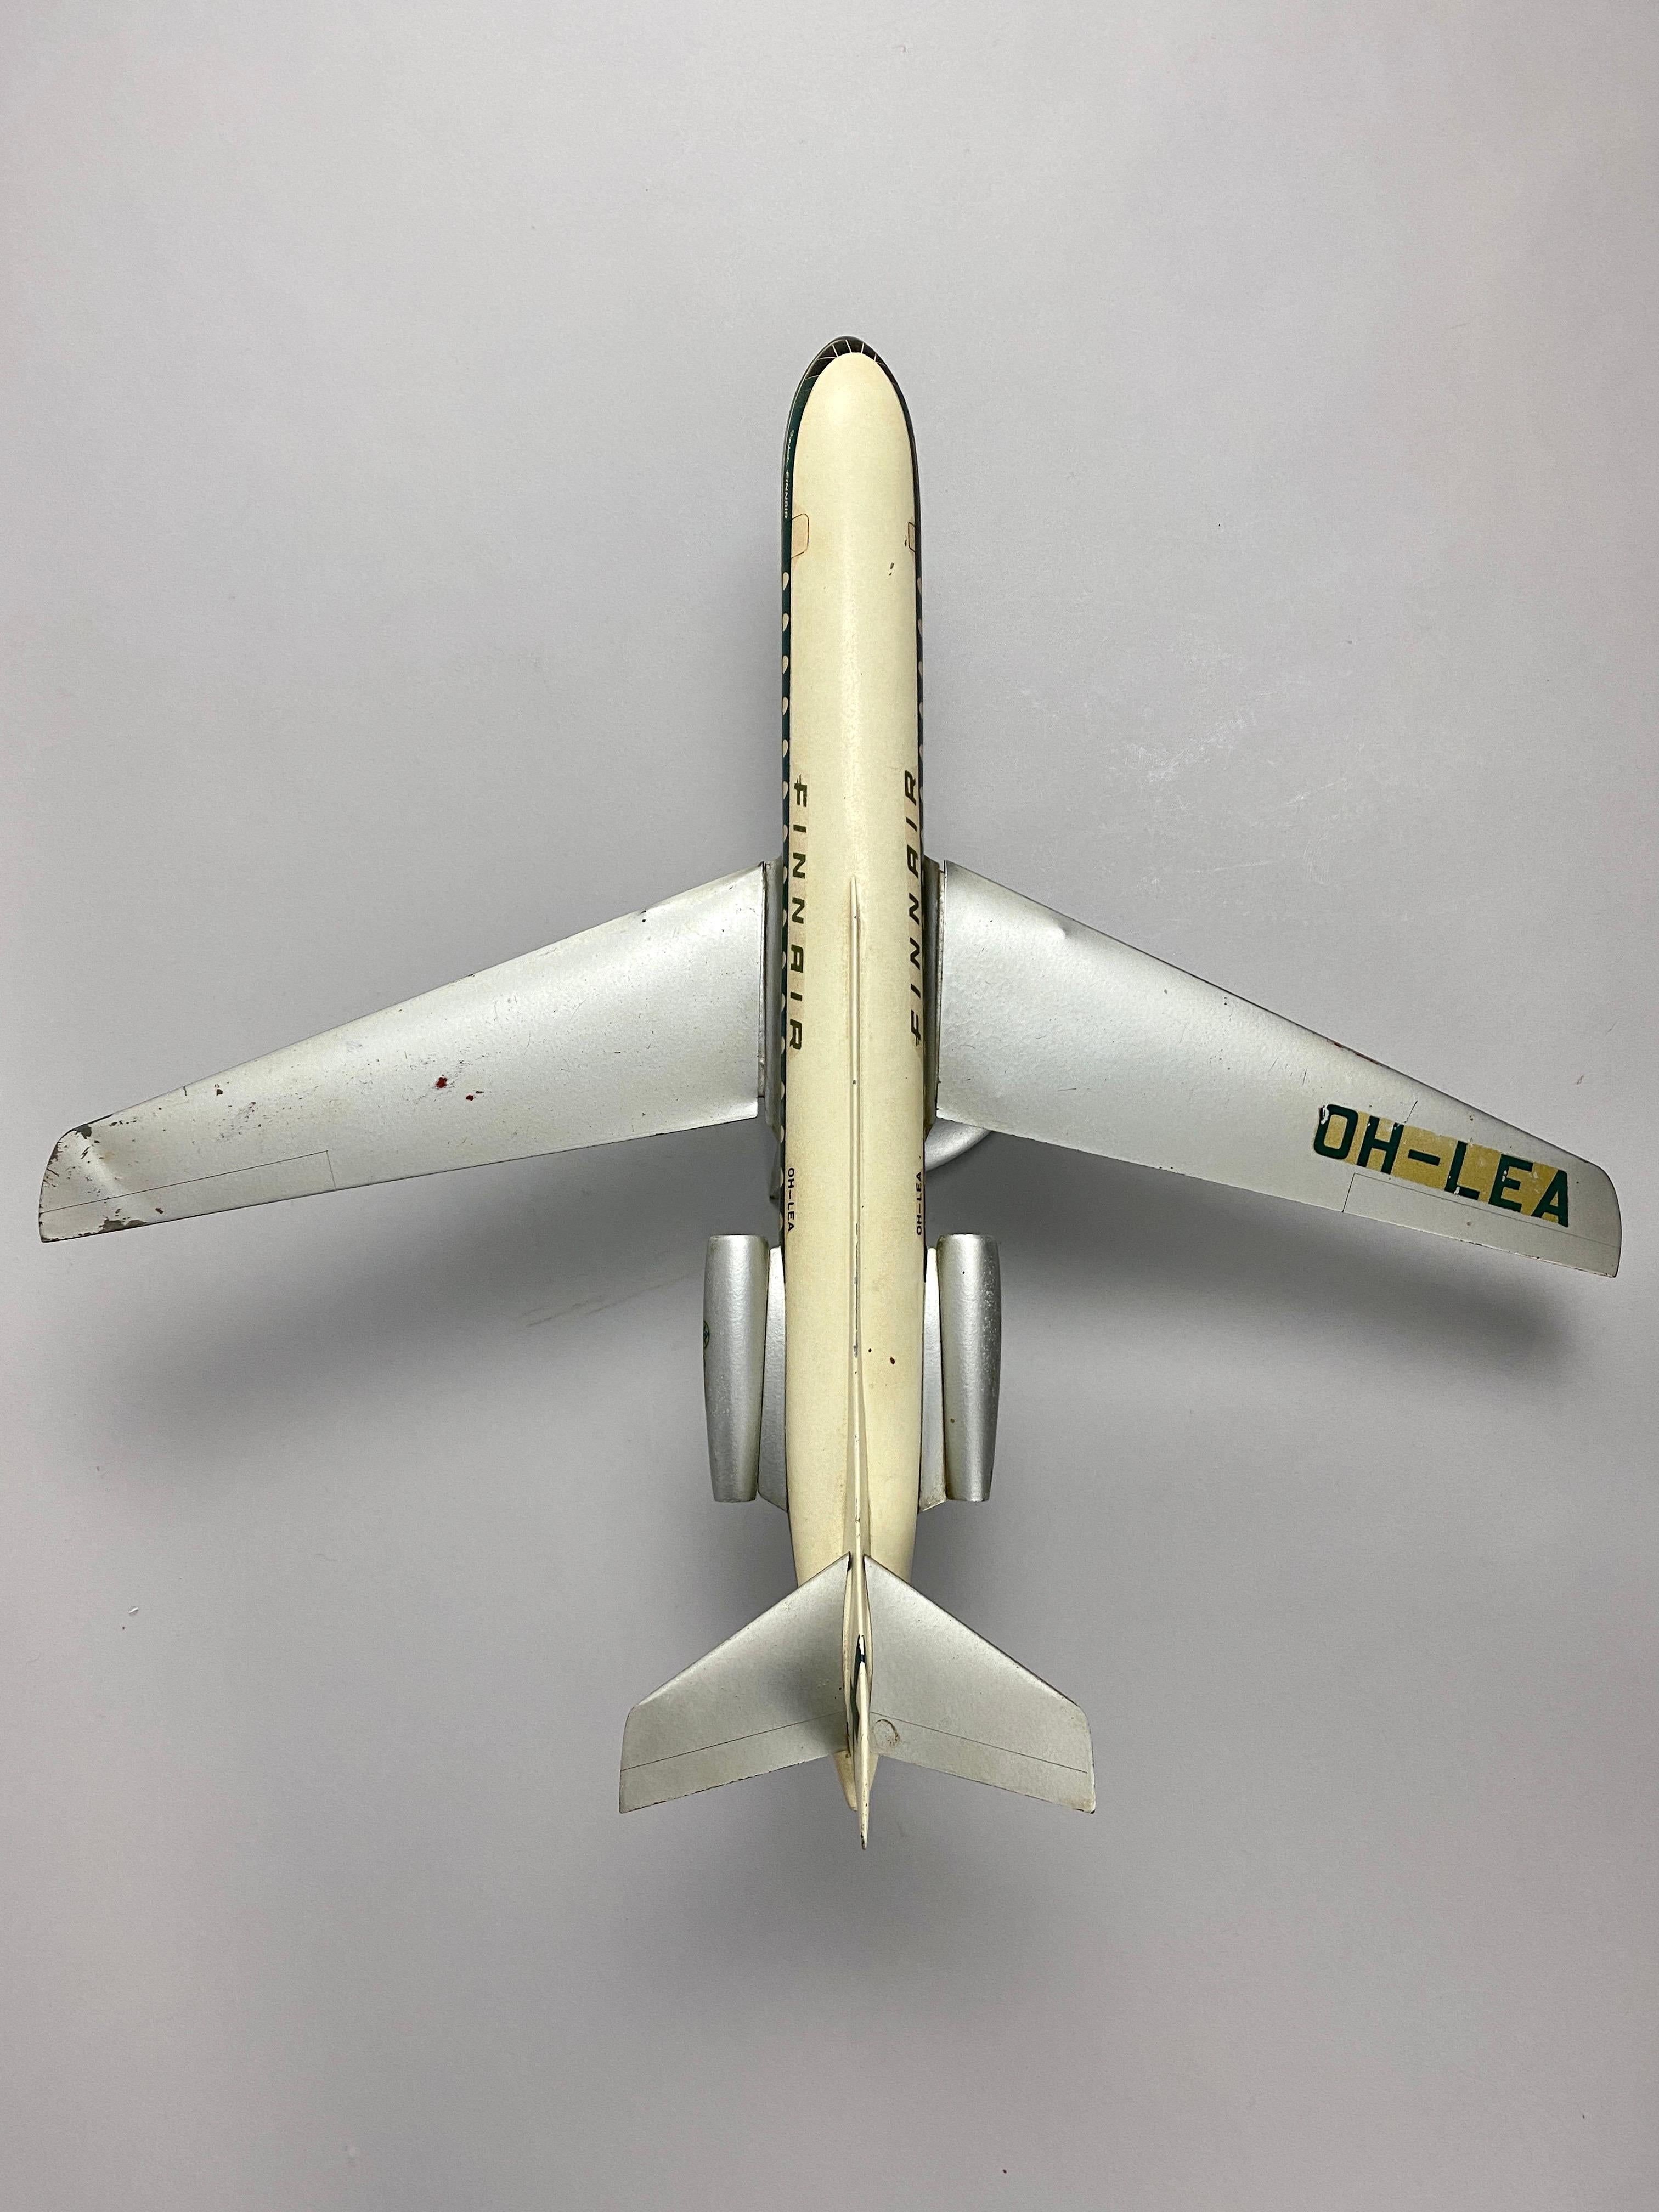 Take flight into aviation history with the iconic 1960's Finnair Aero Caravelle airplane model, meticulously crafted by Schaarschmidt Modelbau in Berlin. This exquisite model pays homage to an era of innovation and elegance in air travel, capturing